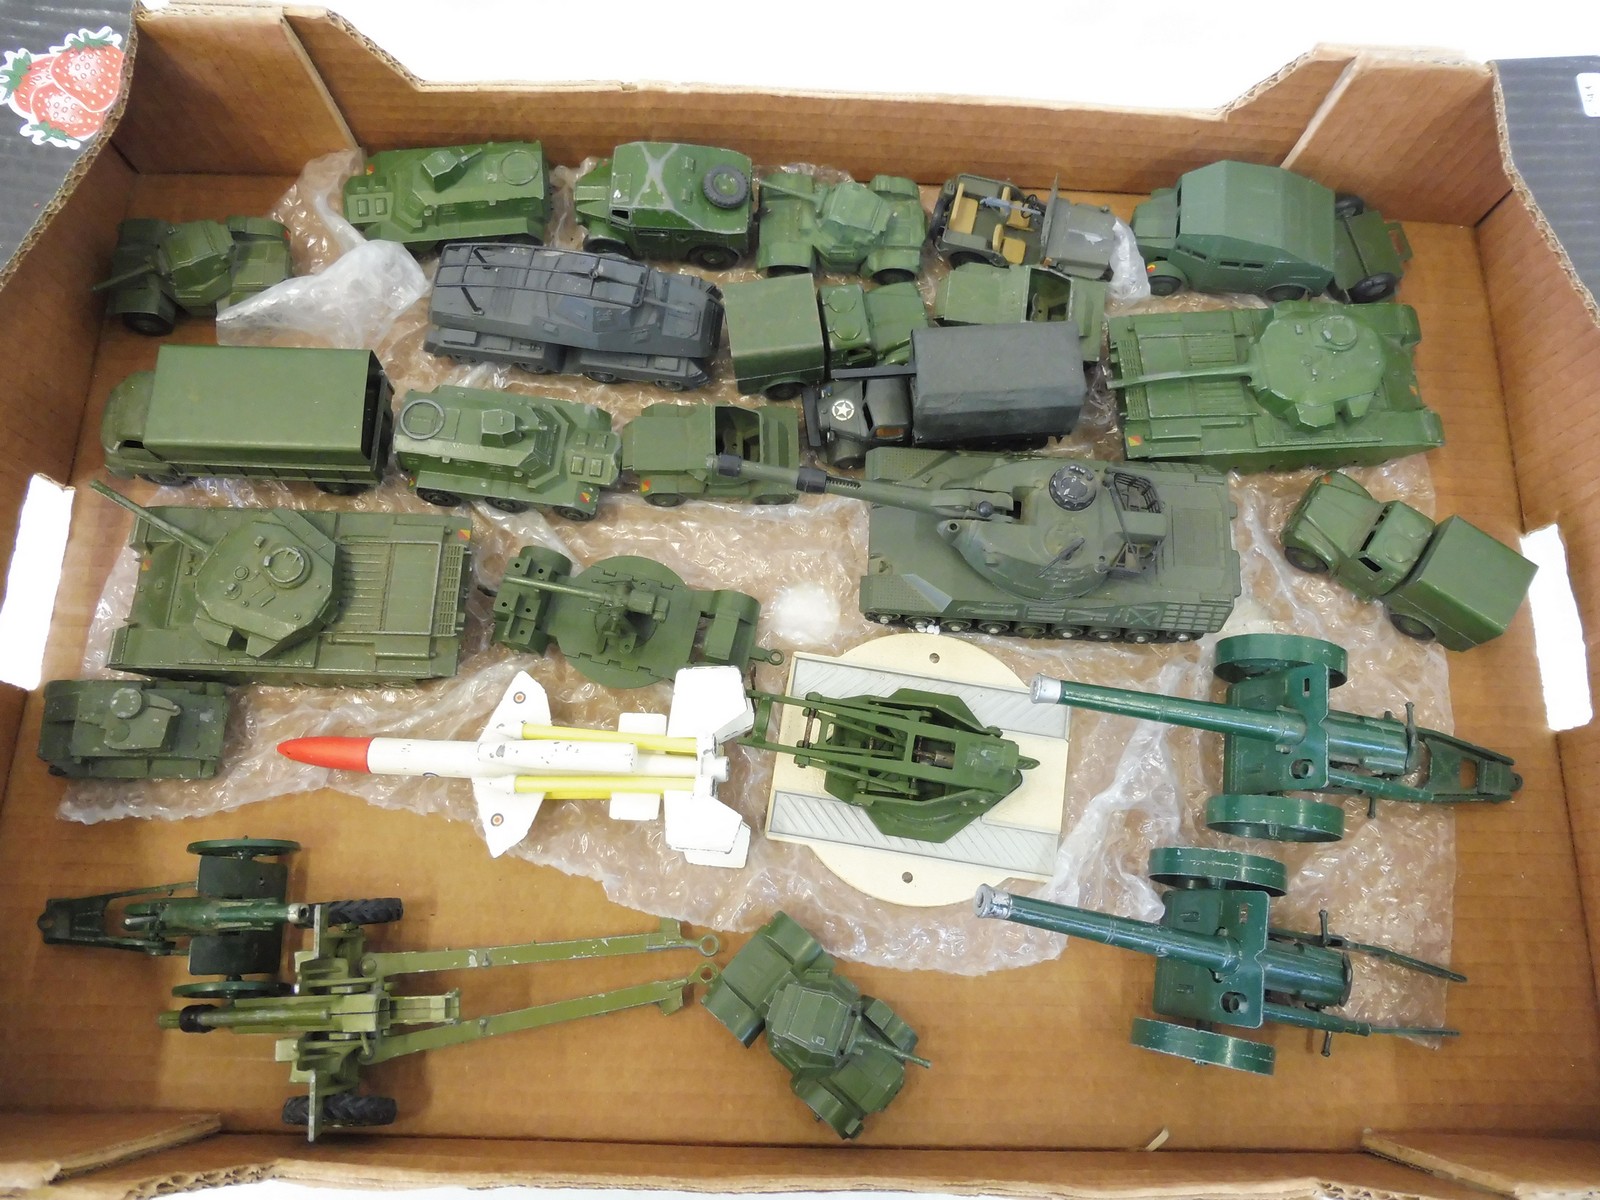 27 military toy vehicles including Dinky, Corgi, Britains etc.